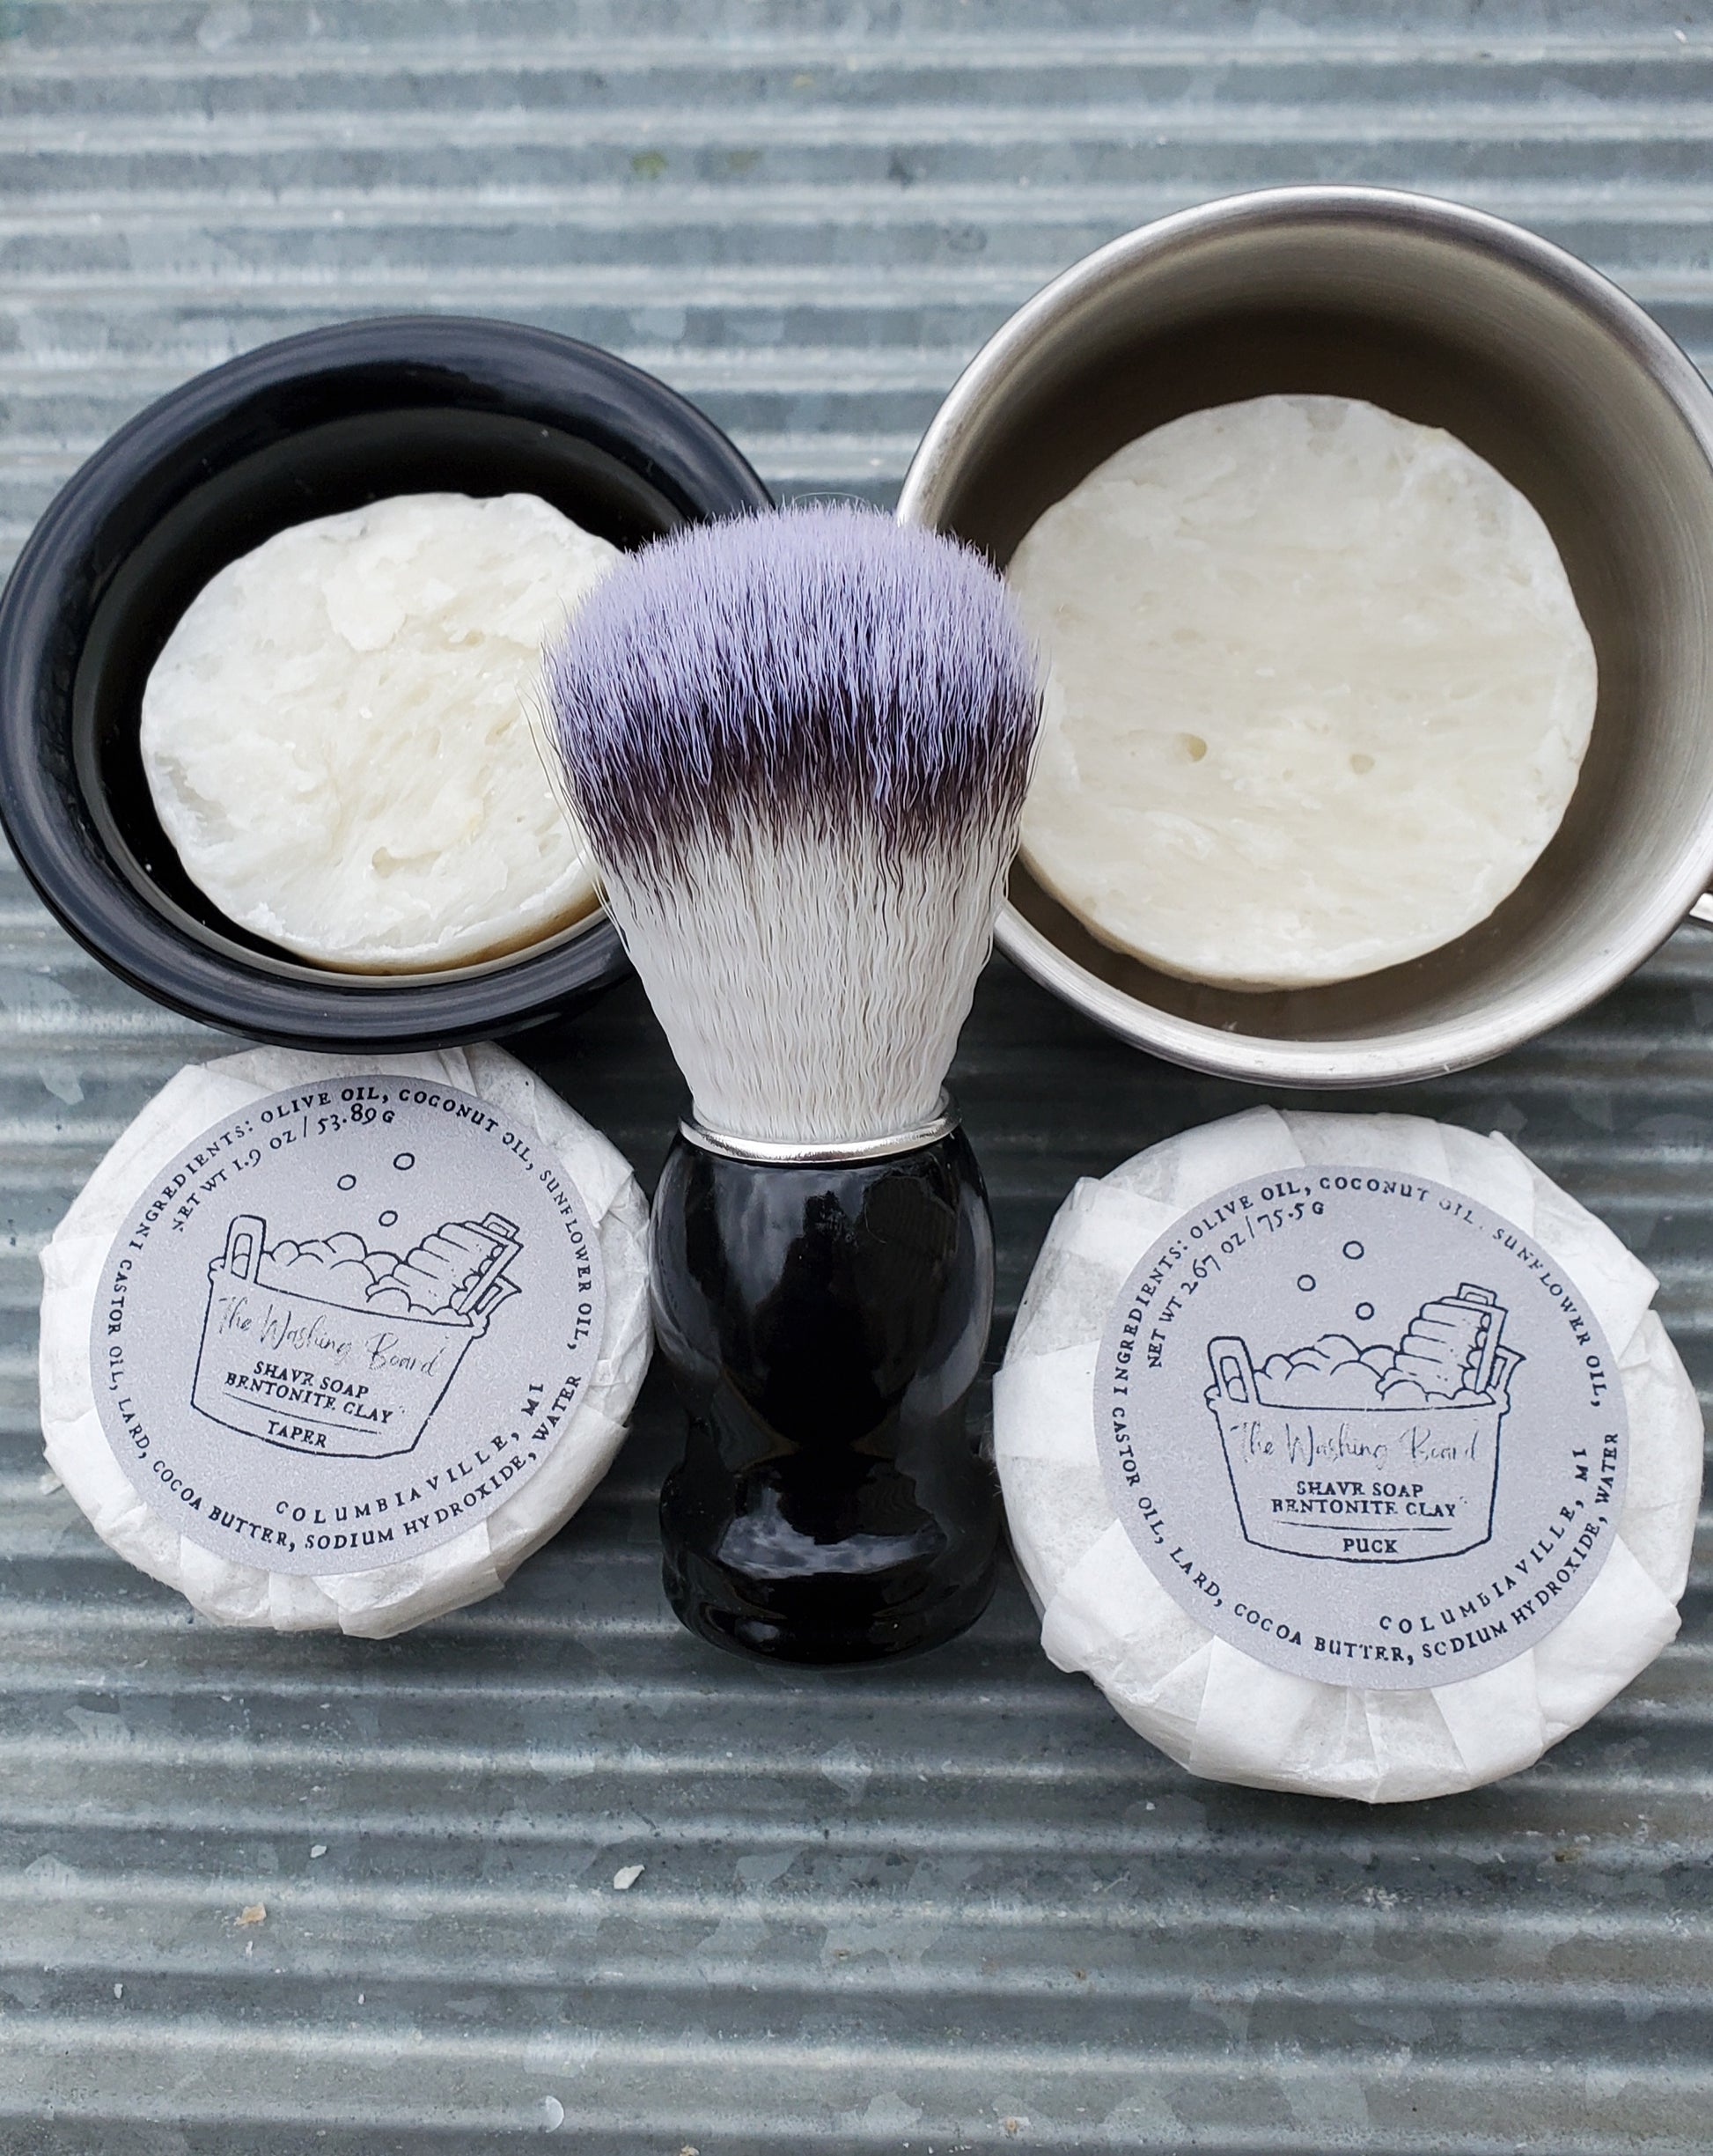 Bentonite Clay Shave Soaps,  "Naked" Taper in the black bowl, "naked" Puck in the stainless steel cup,  a Shave Brush, a wrapped taper and a wrapped puck.